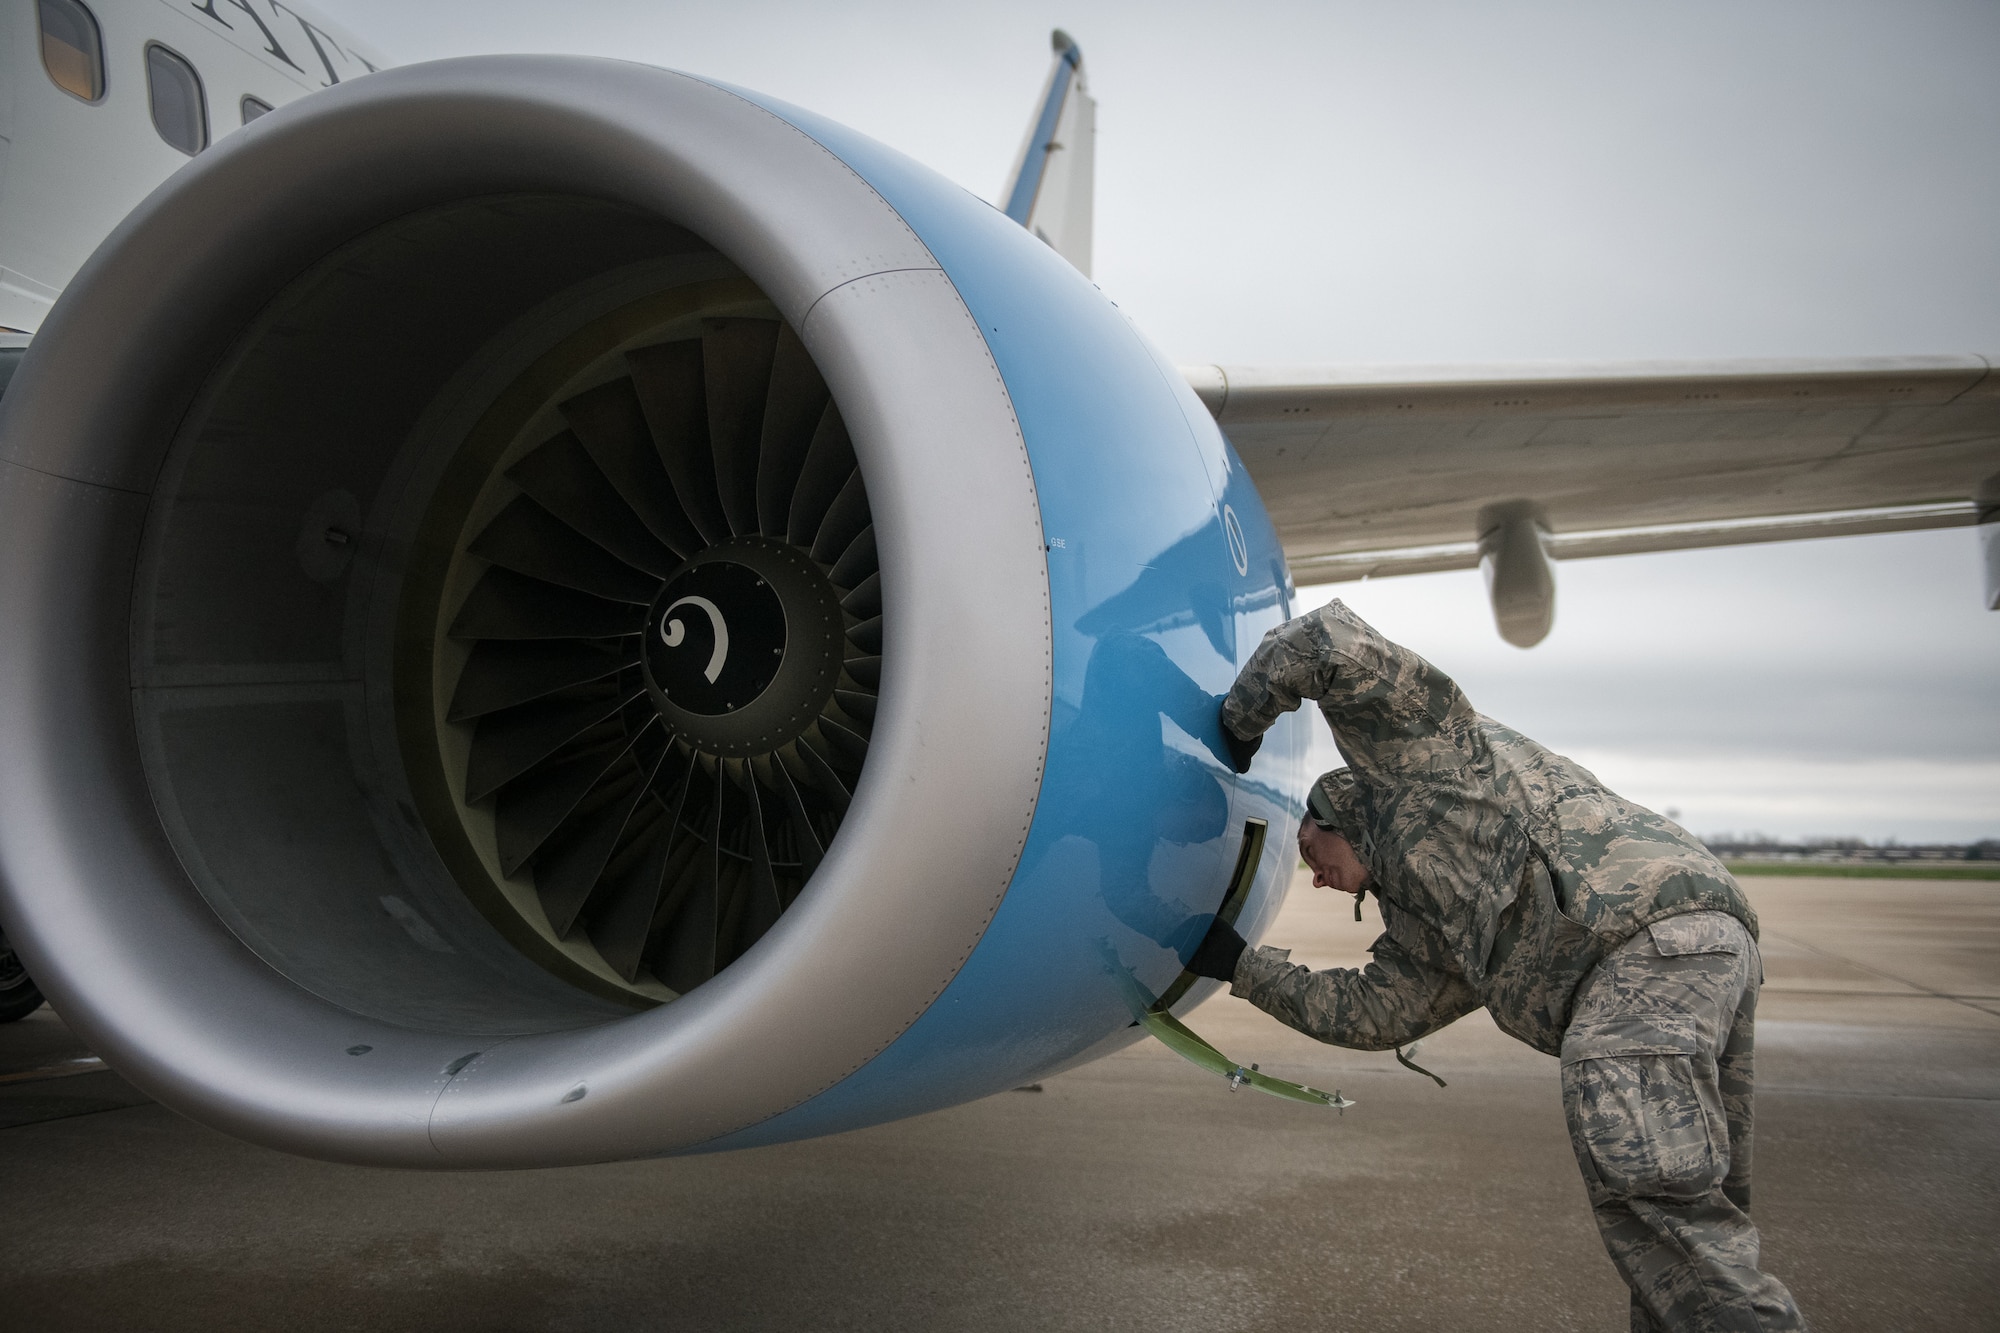 Tech. Sgt. Brandon Zangeneh, crew chief, 932nd Maintenance Squadron, performs a physical preflight inspection March, 20, 2020 Scott Air Force Base Illinois as the 932nd Airlift Wing and 73rd Airlift Squadron continue training operations during COVID-19.  Pilots are required to maintain readiness and the 932nd MXS is working hard with reduced manning in support of continued missions. The 932nd Airlift Wing is the only Air Force Reserve Command unit that flies the C-40C, which is used to provide world-class airlift for U.S. national and military leaders.(U.S. Air Force photo by Christopher Parr)